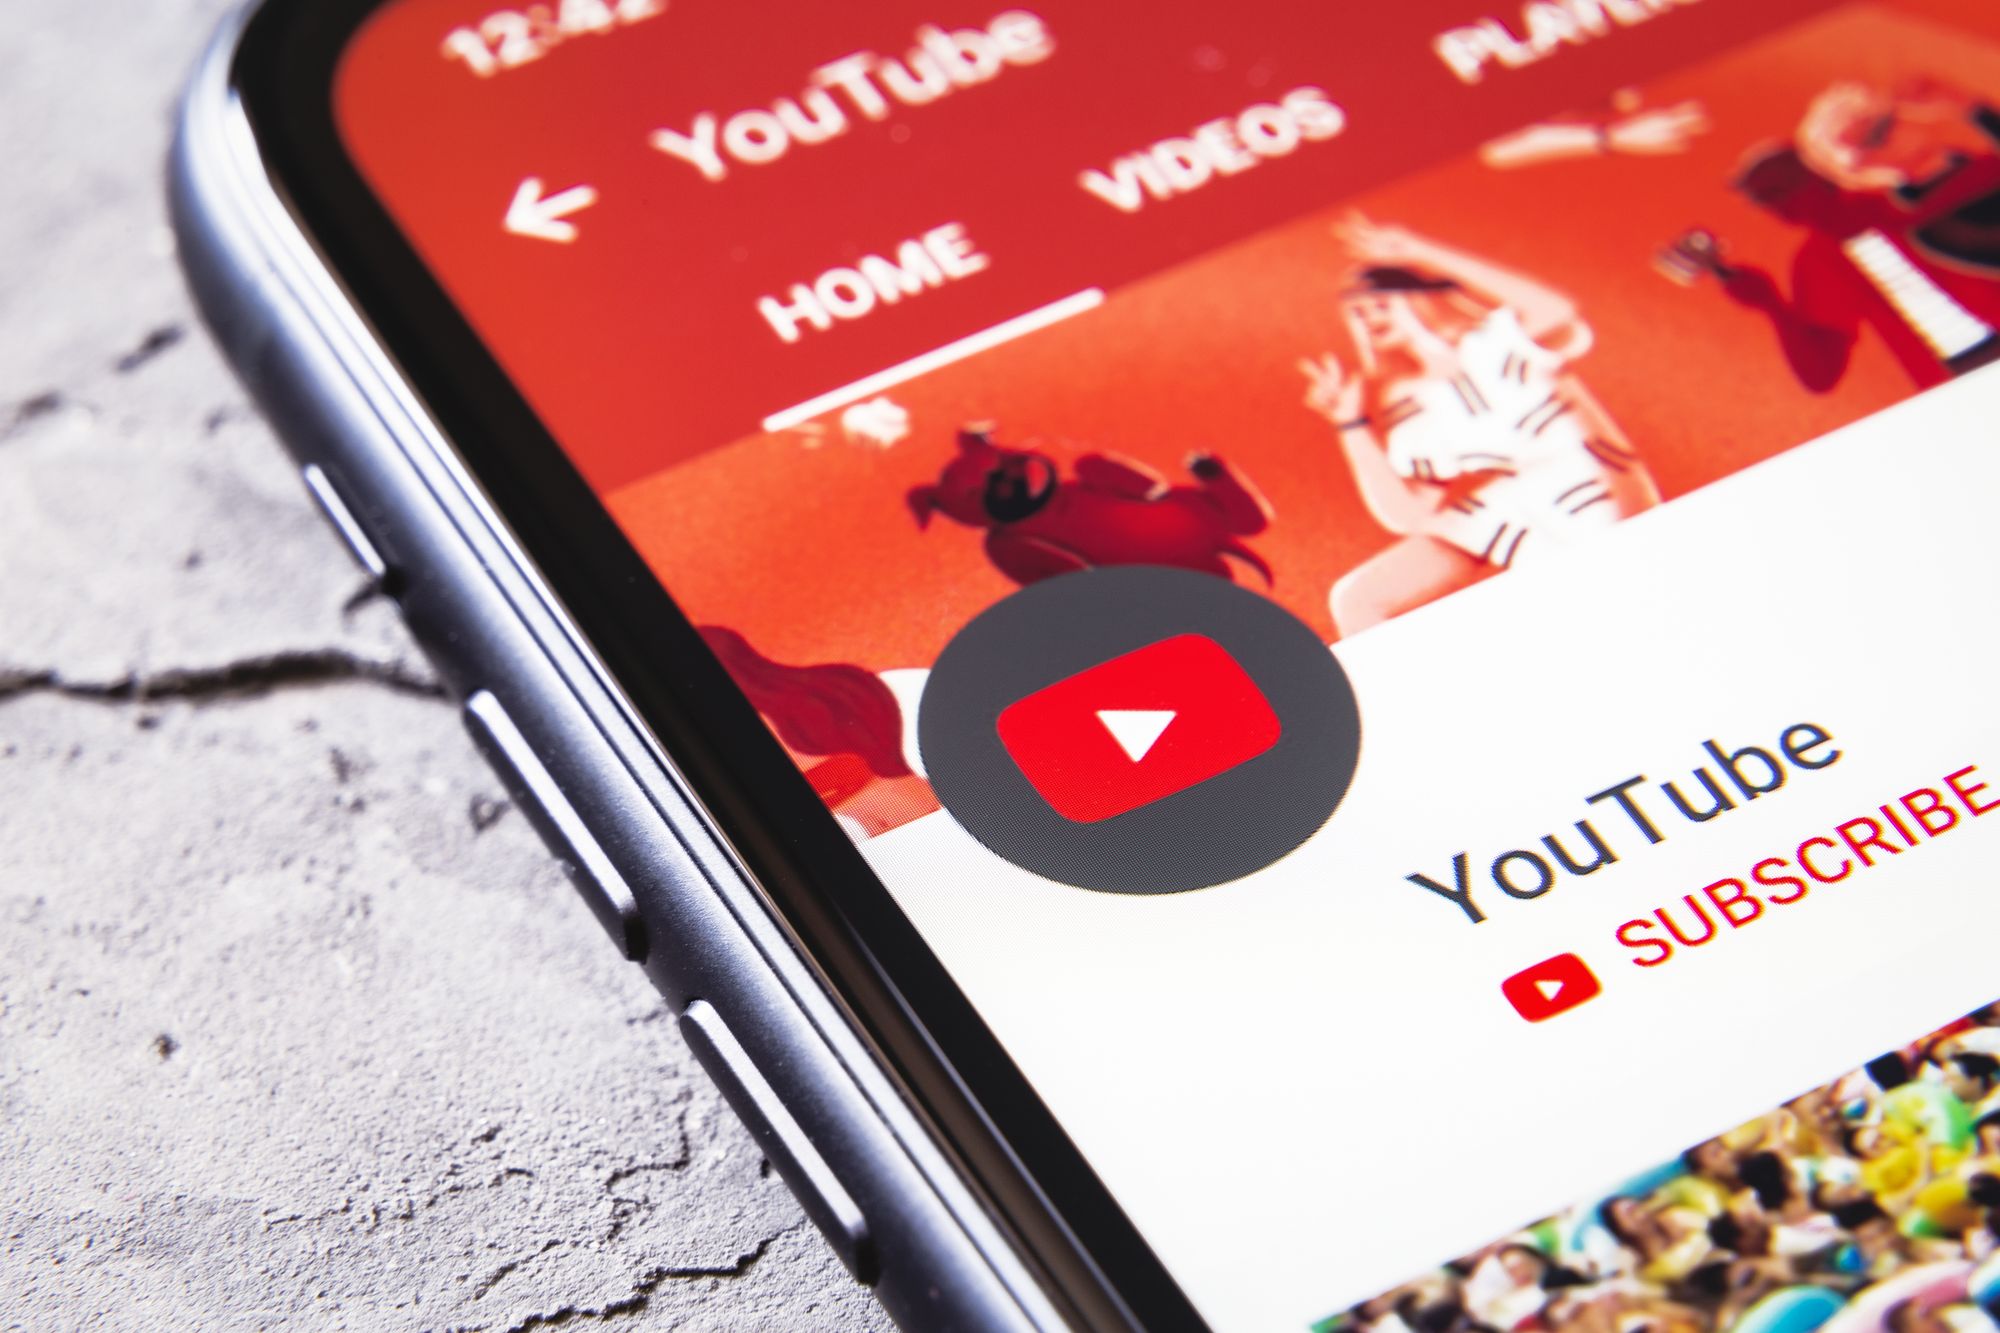 YouTube is once again the most popular social media platform | Engadget